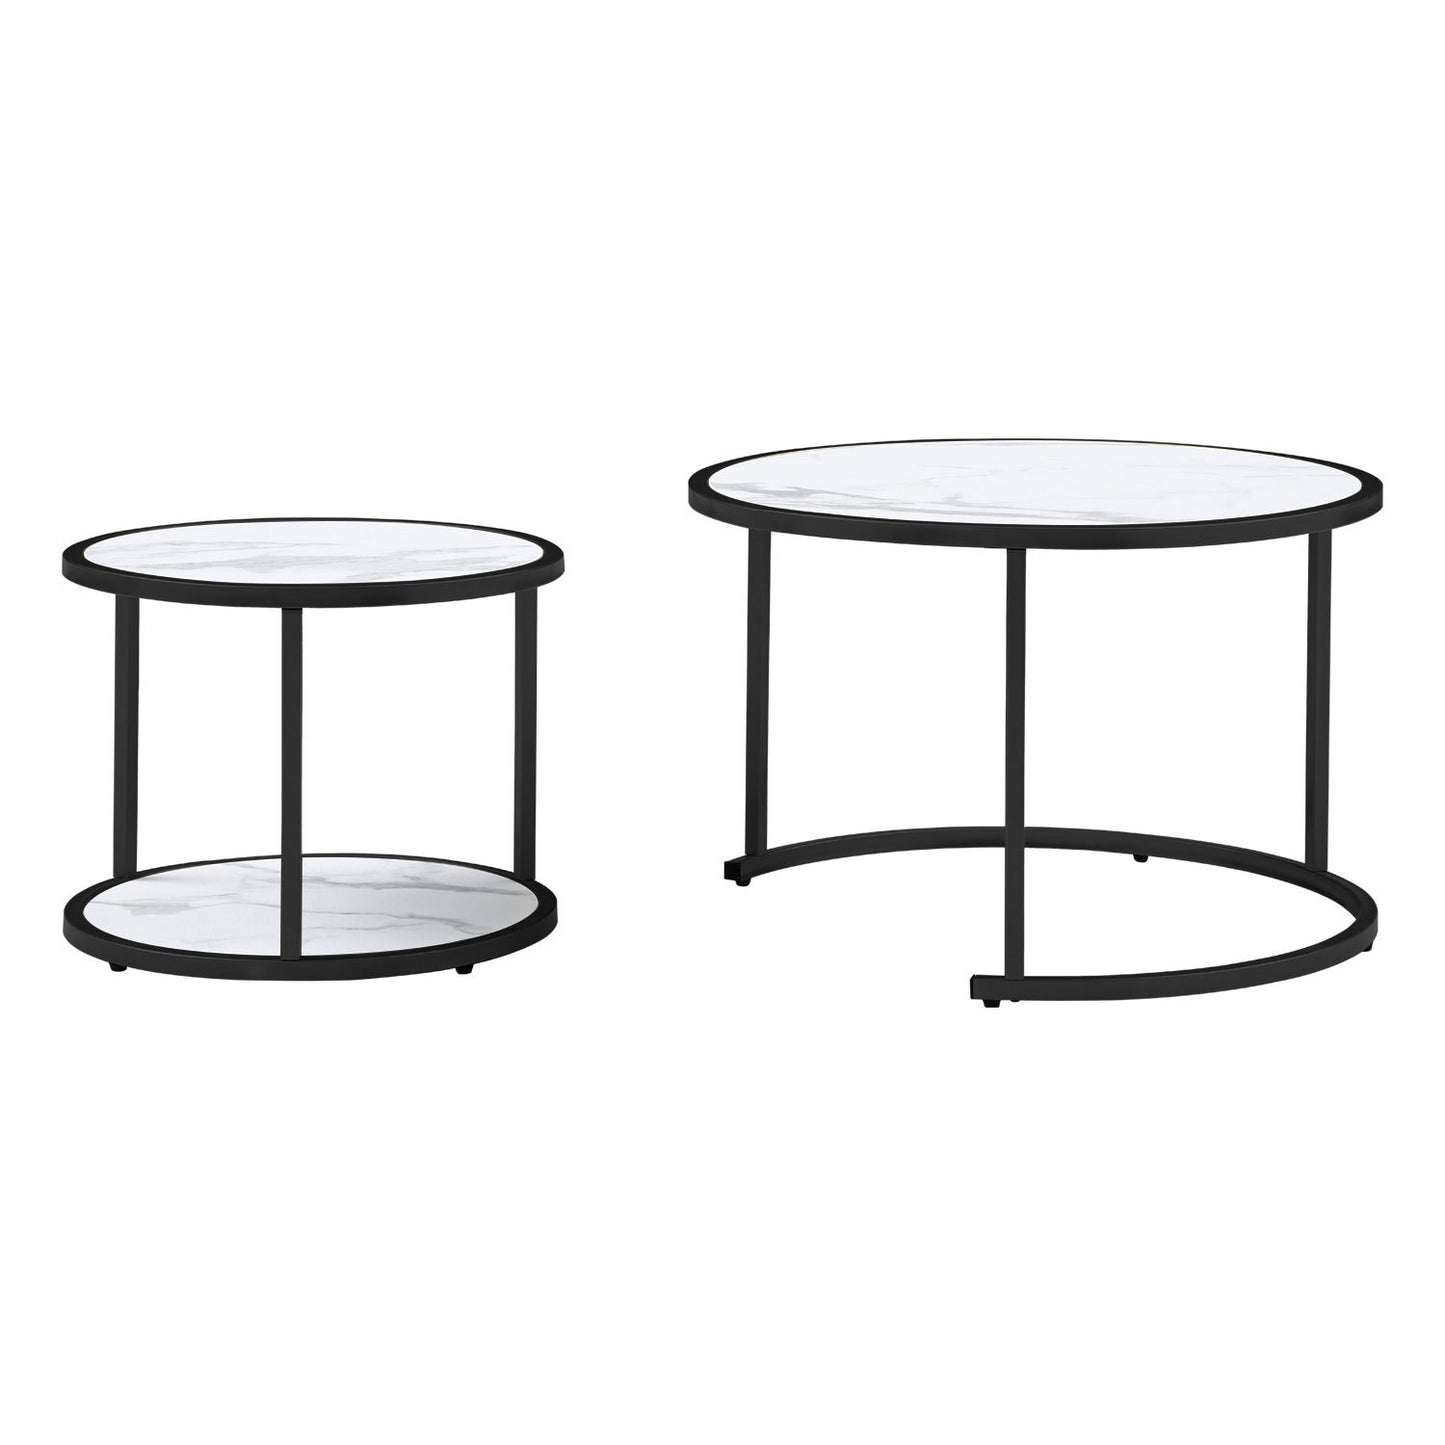 27.16inch Marble Pattern MDF Top with Black Metal Frame nesting coffee table set of 2 - Enova Luxe Home Store